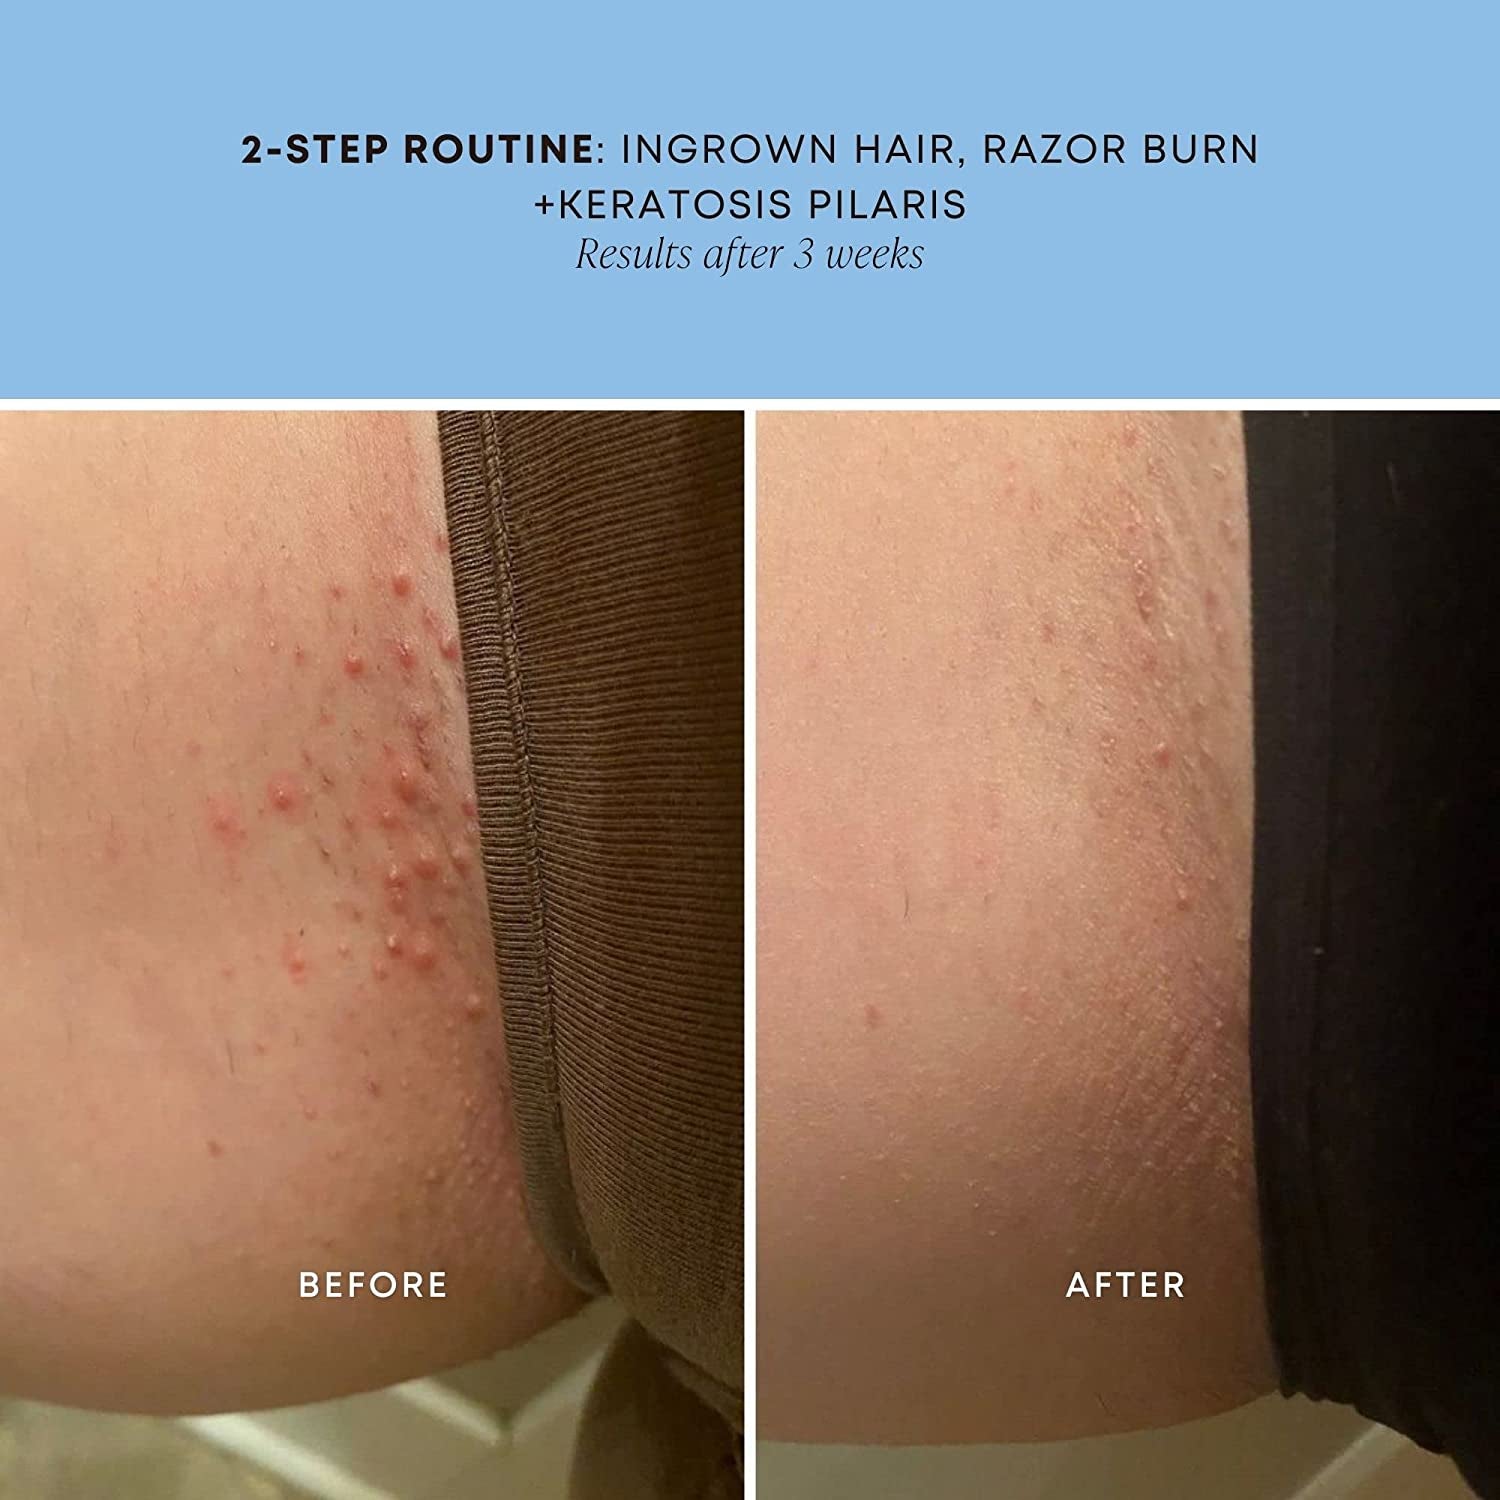 model skin before and after using oil with red bumps before and bumps gone after using two step routine for three weeks